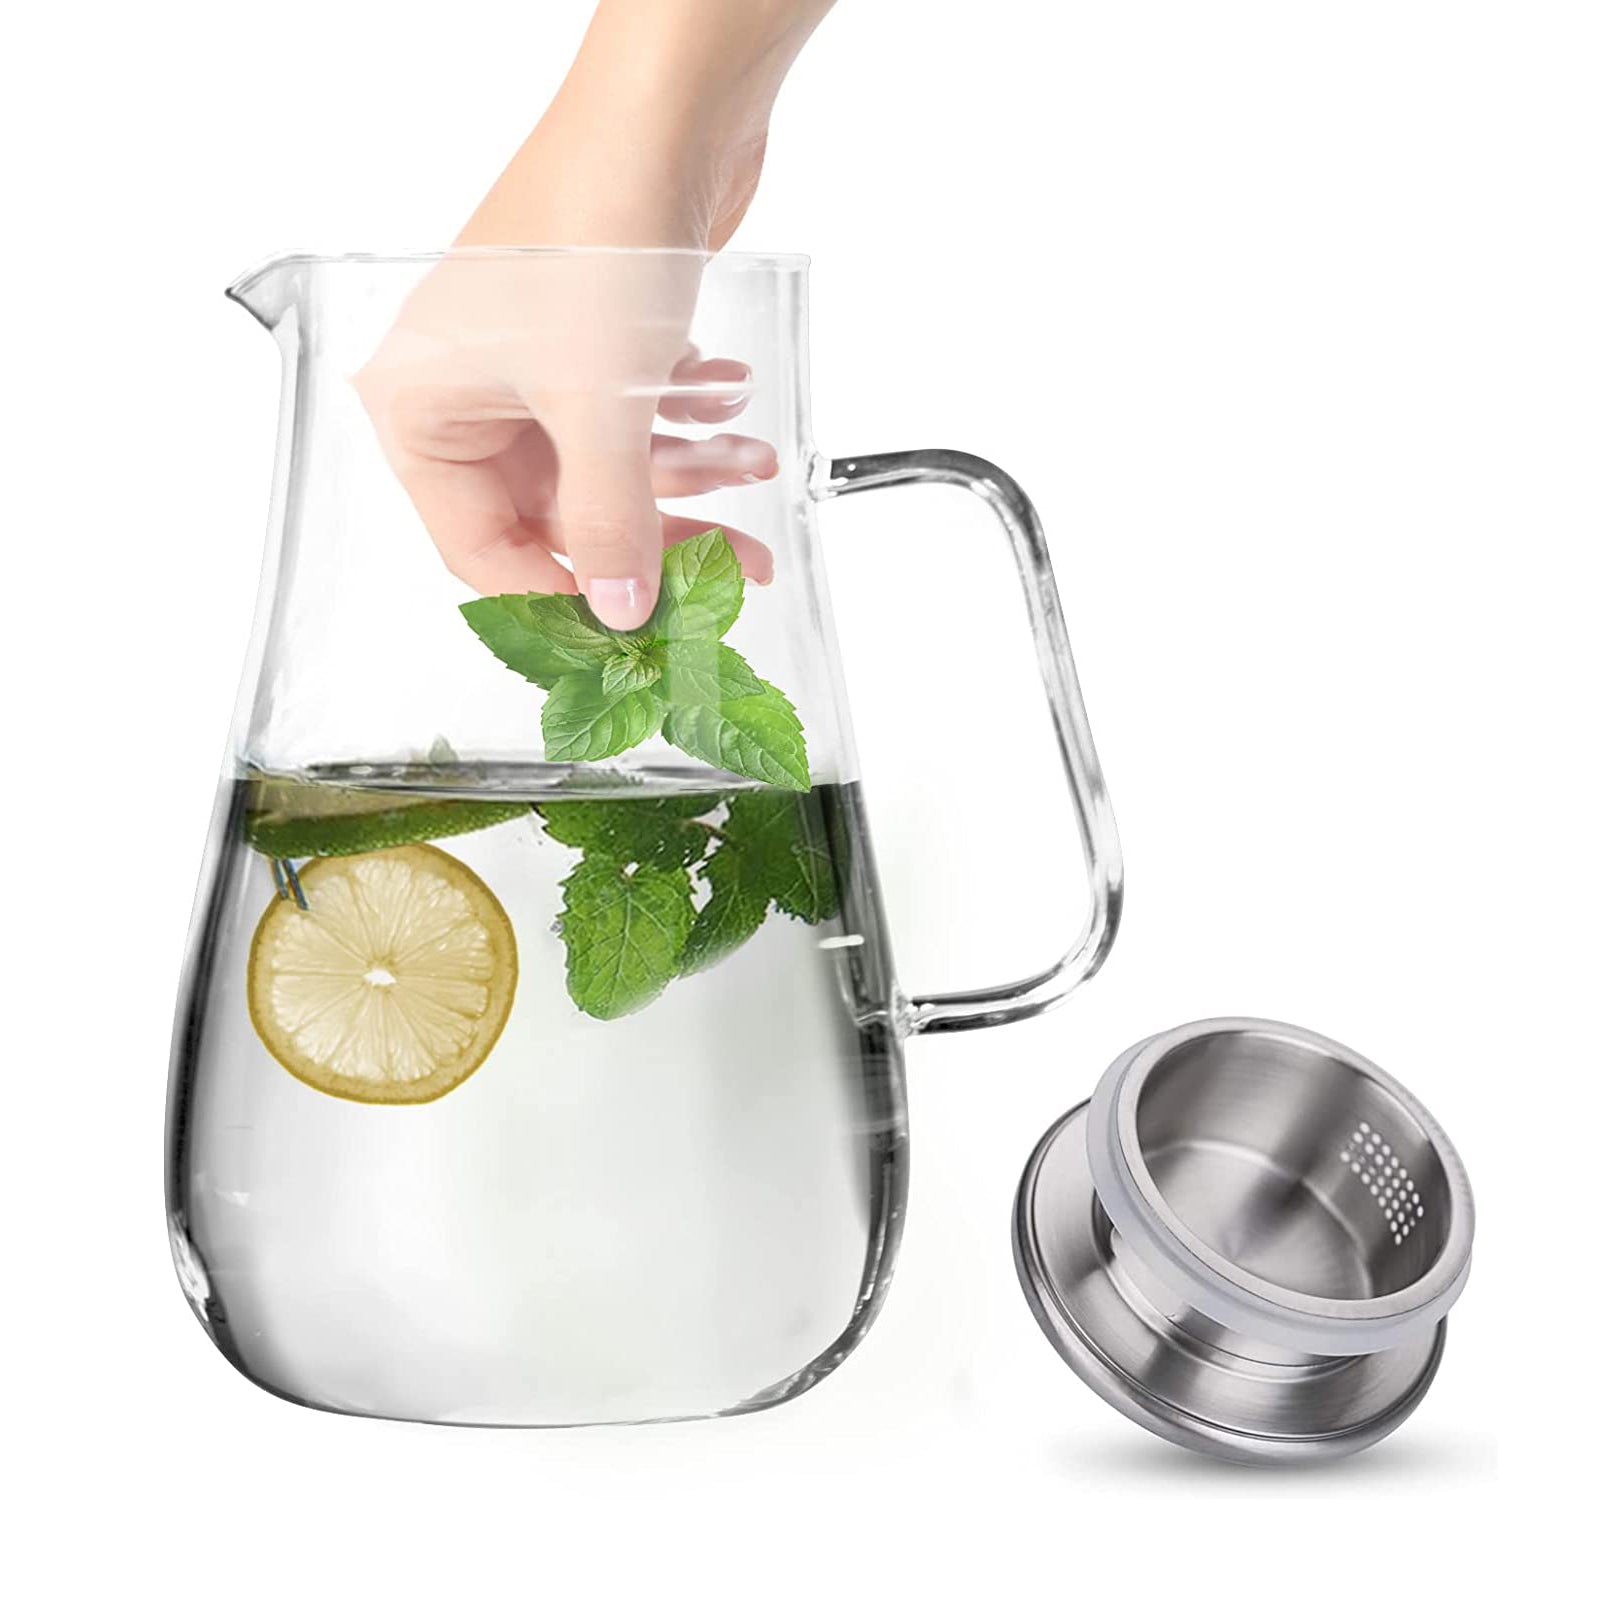 68 ounce - Catalina Cane Wrapped Serving Pitcher – Bar Supplies